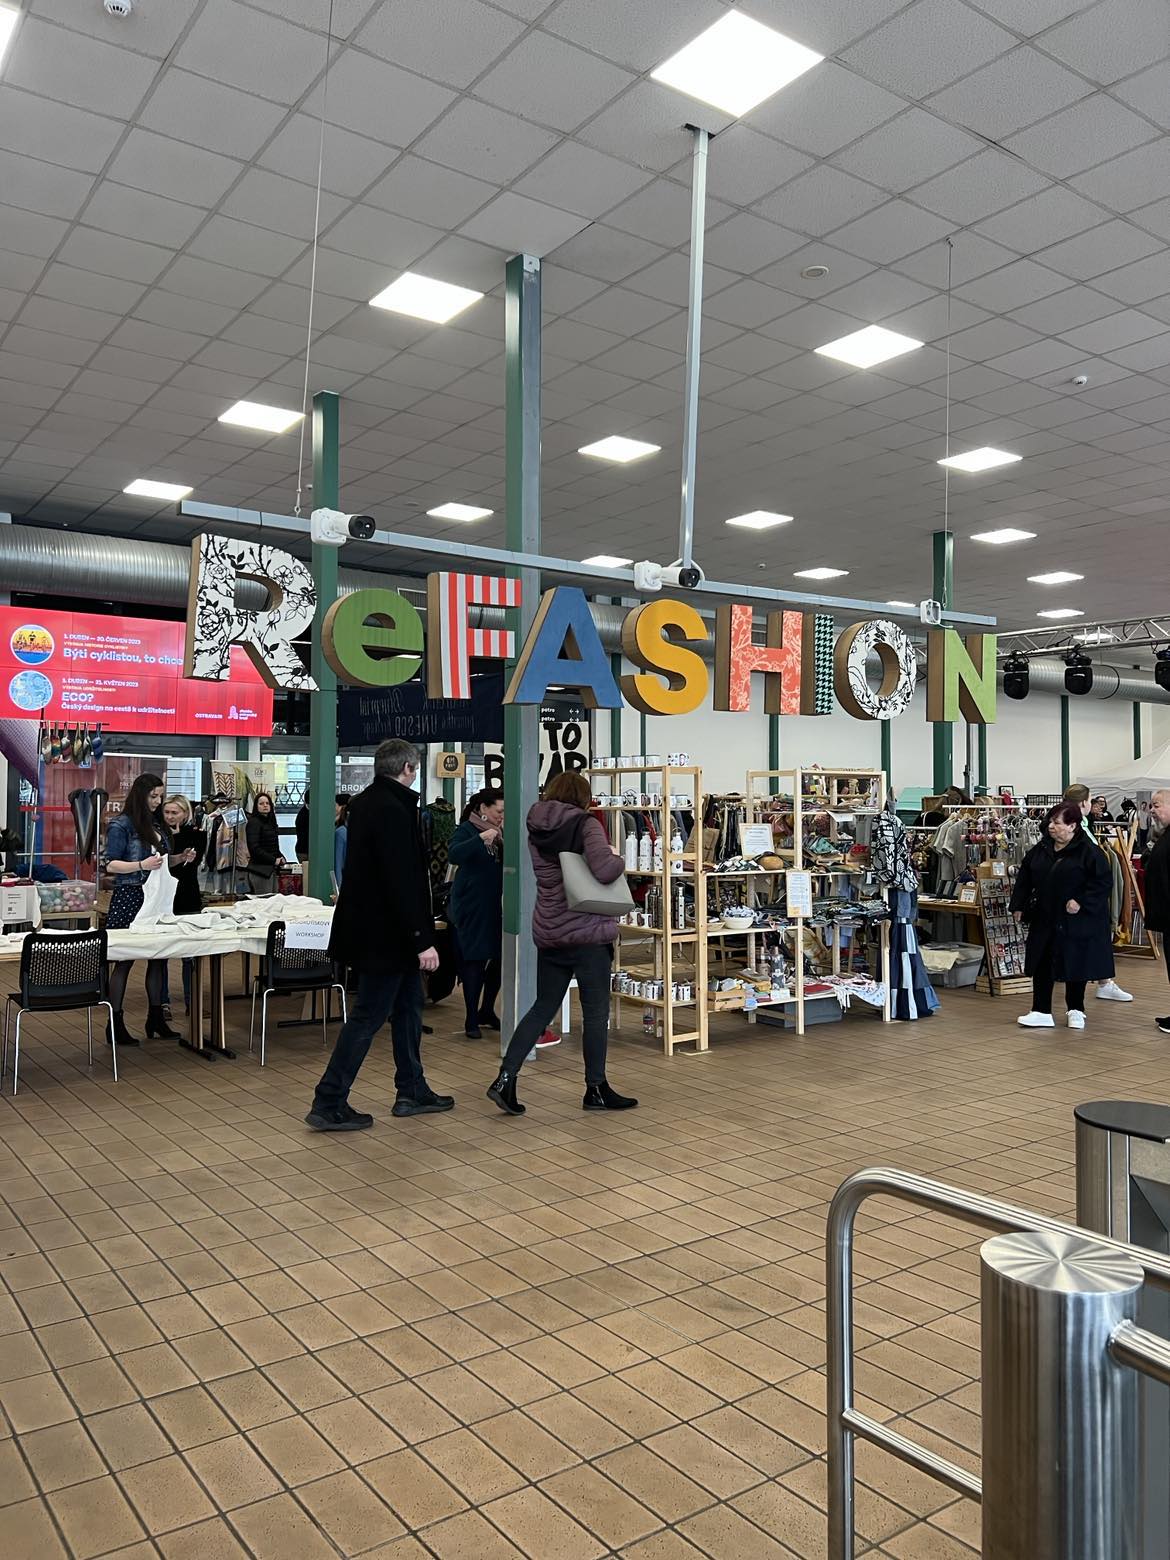 News from MSIC - ReFashion festival 